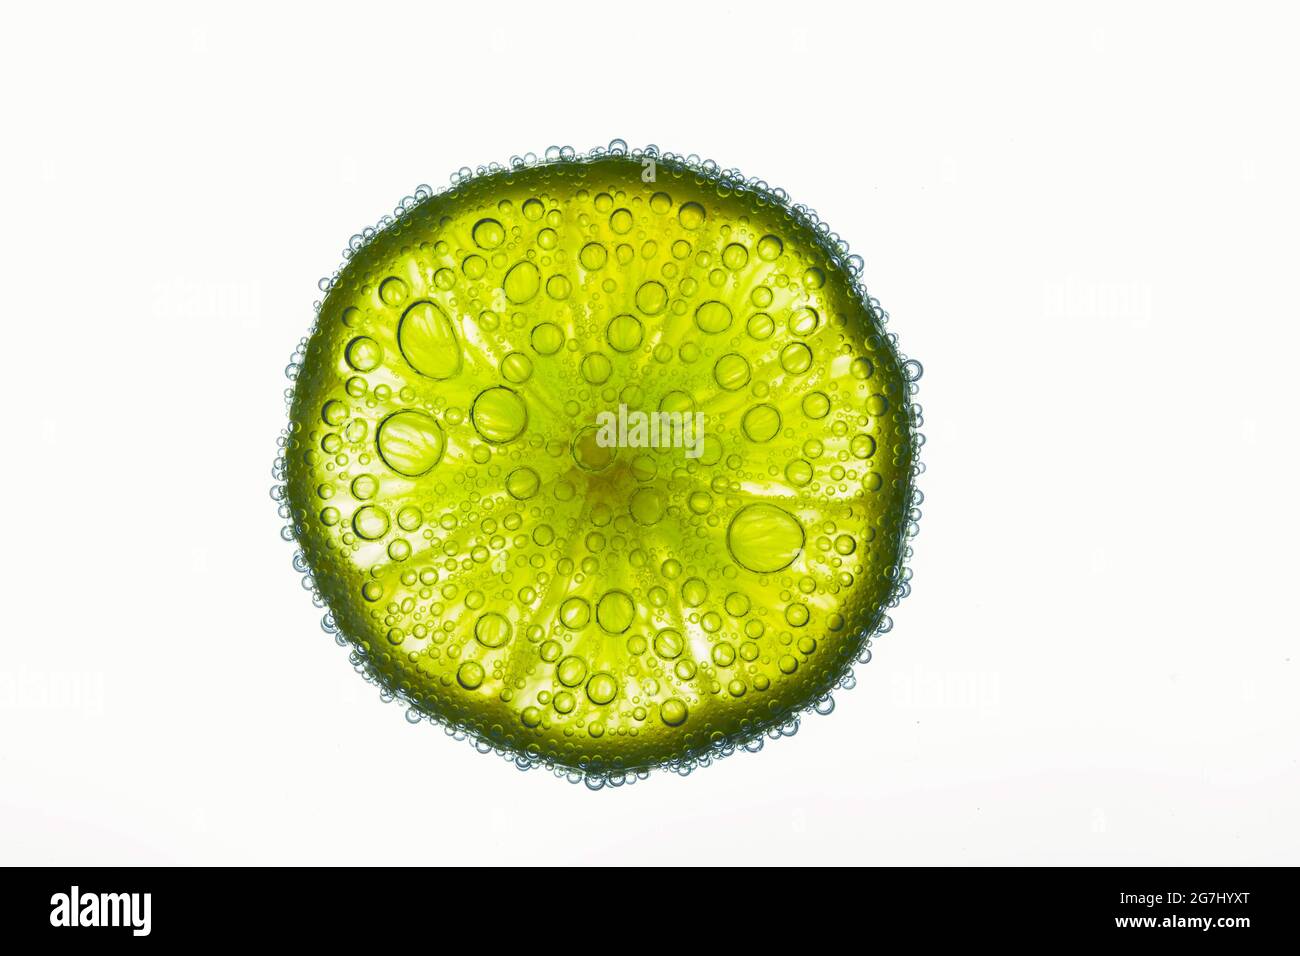 Close-up of air bubbles covering slice of juicy lime floating in water Stock Photo